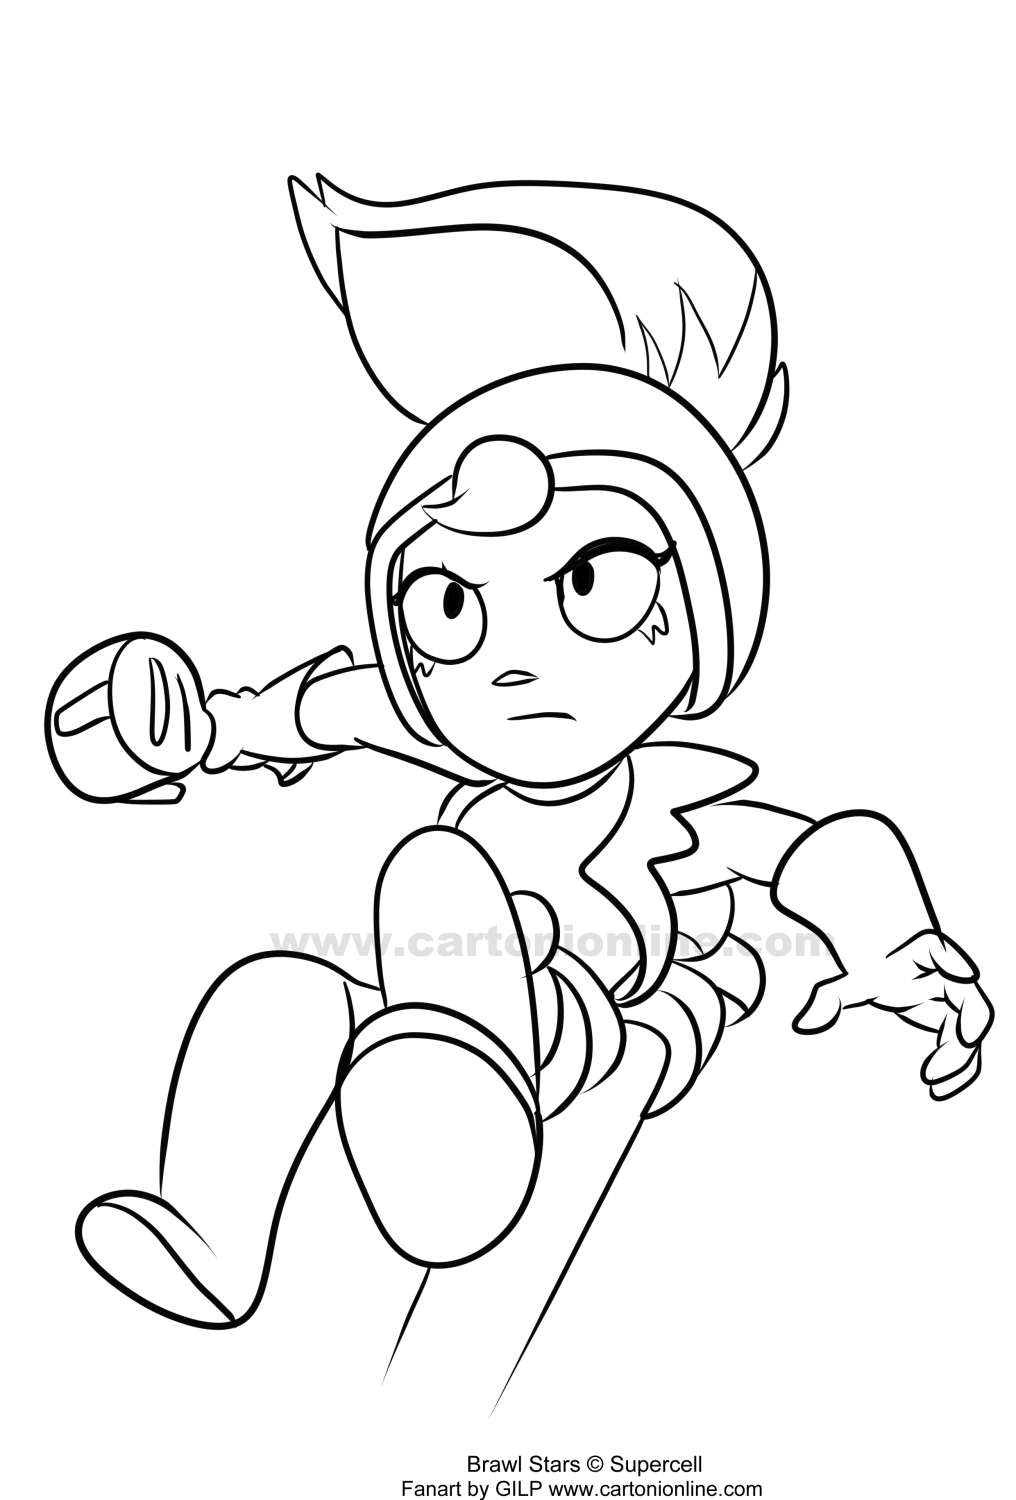 Janet 06 from Brawl Stars coloring pages to print and coloring